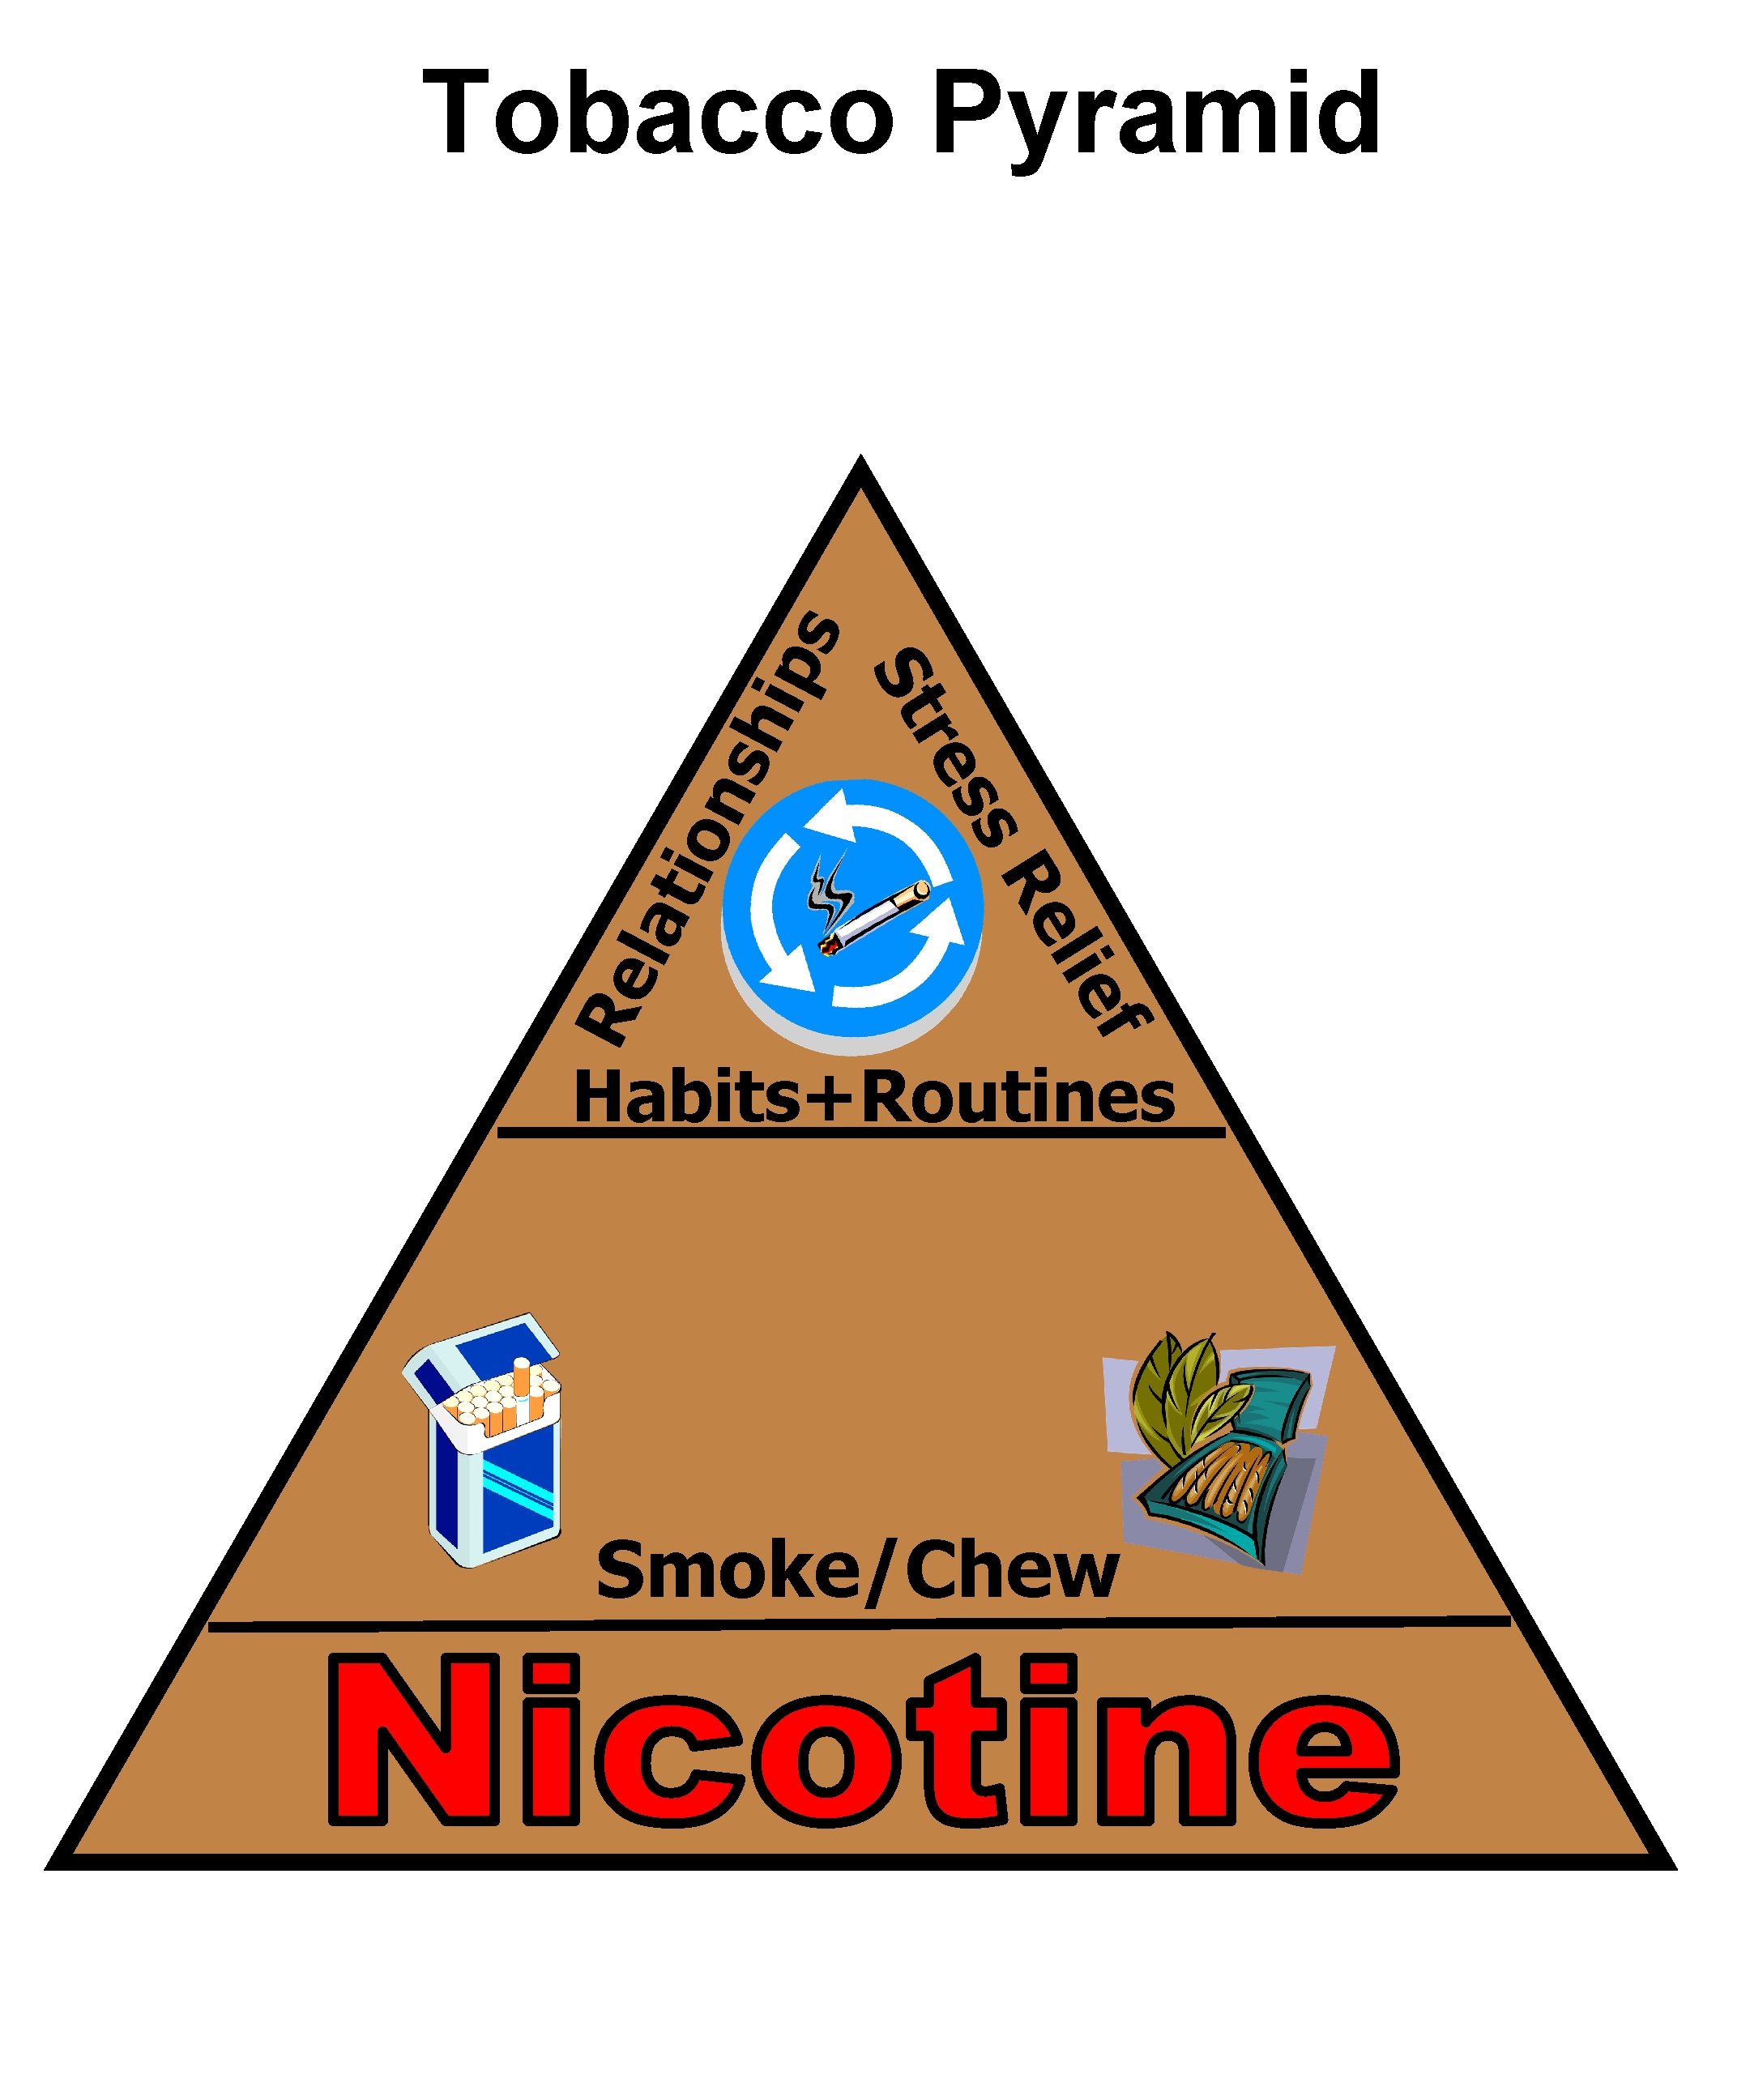 f lie sh ion lat Re Re ss re St ips Tobacco Pyramid Habits+Routines